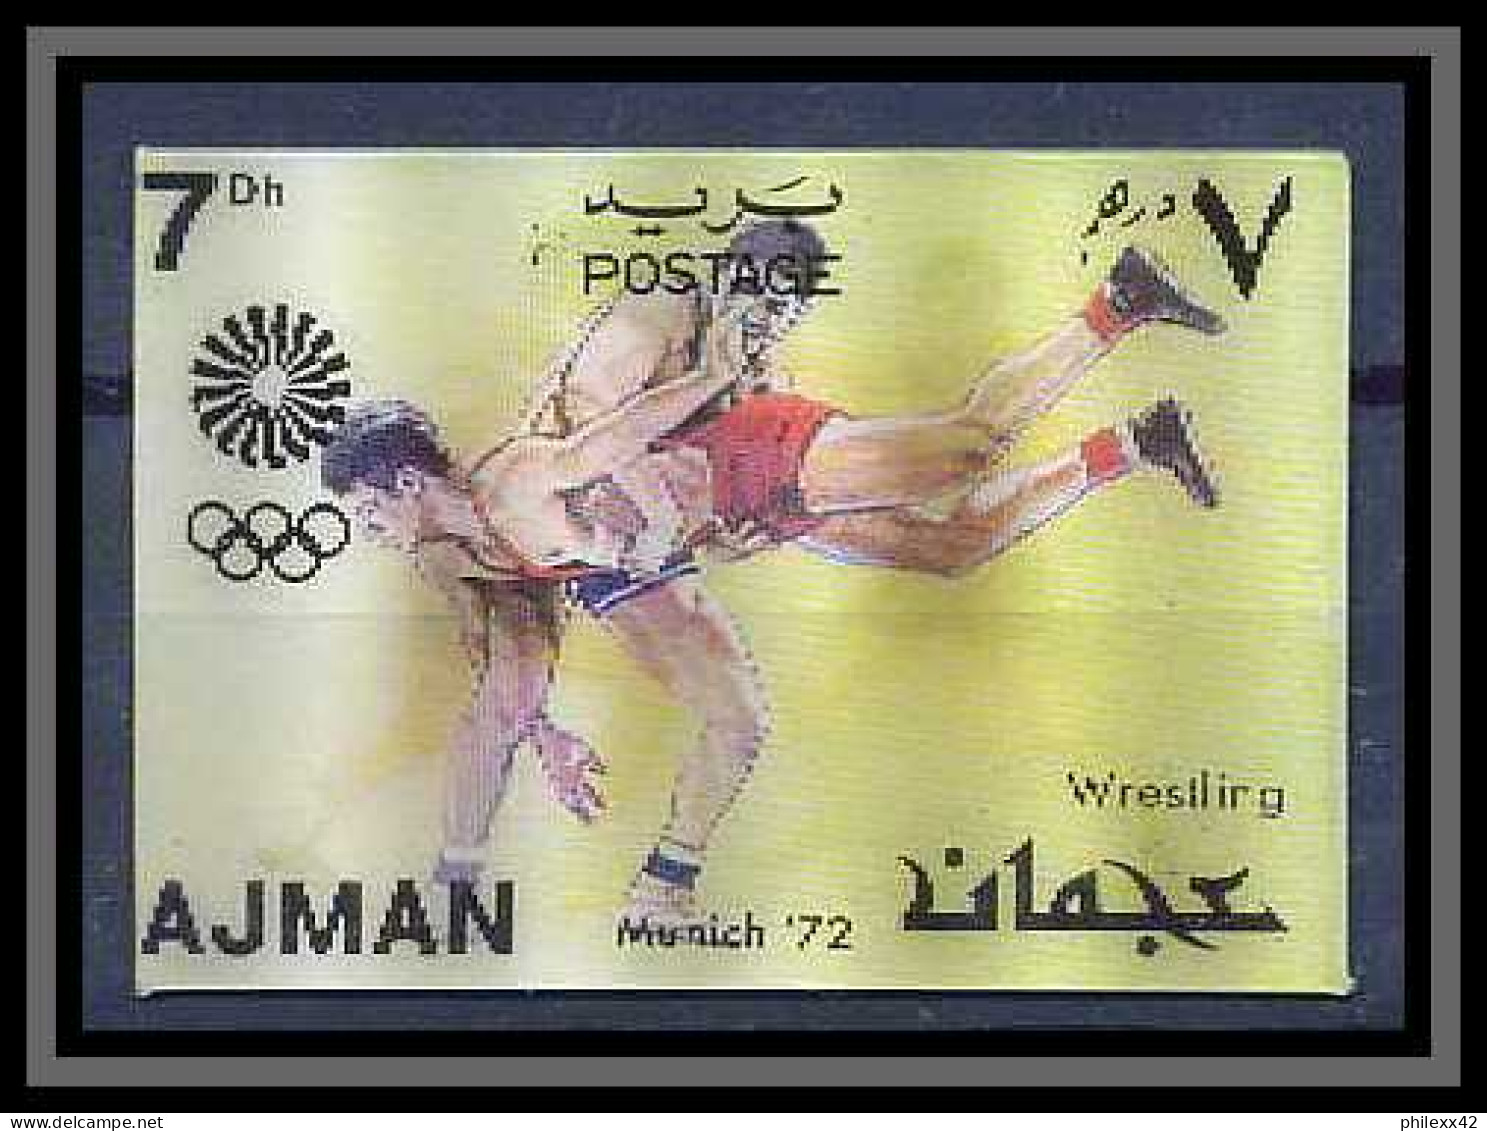 0190/ Ajman ** MNH Michel N°1436 Boxe Lutte Wrestling Jeux Olympiques (olympic Games) Munich 1972 3d Stamps Timbres 3d  - Lucha